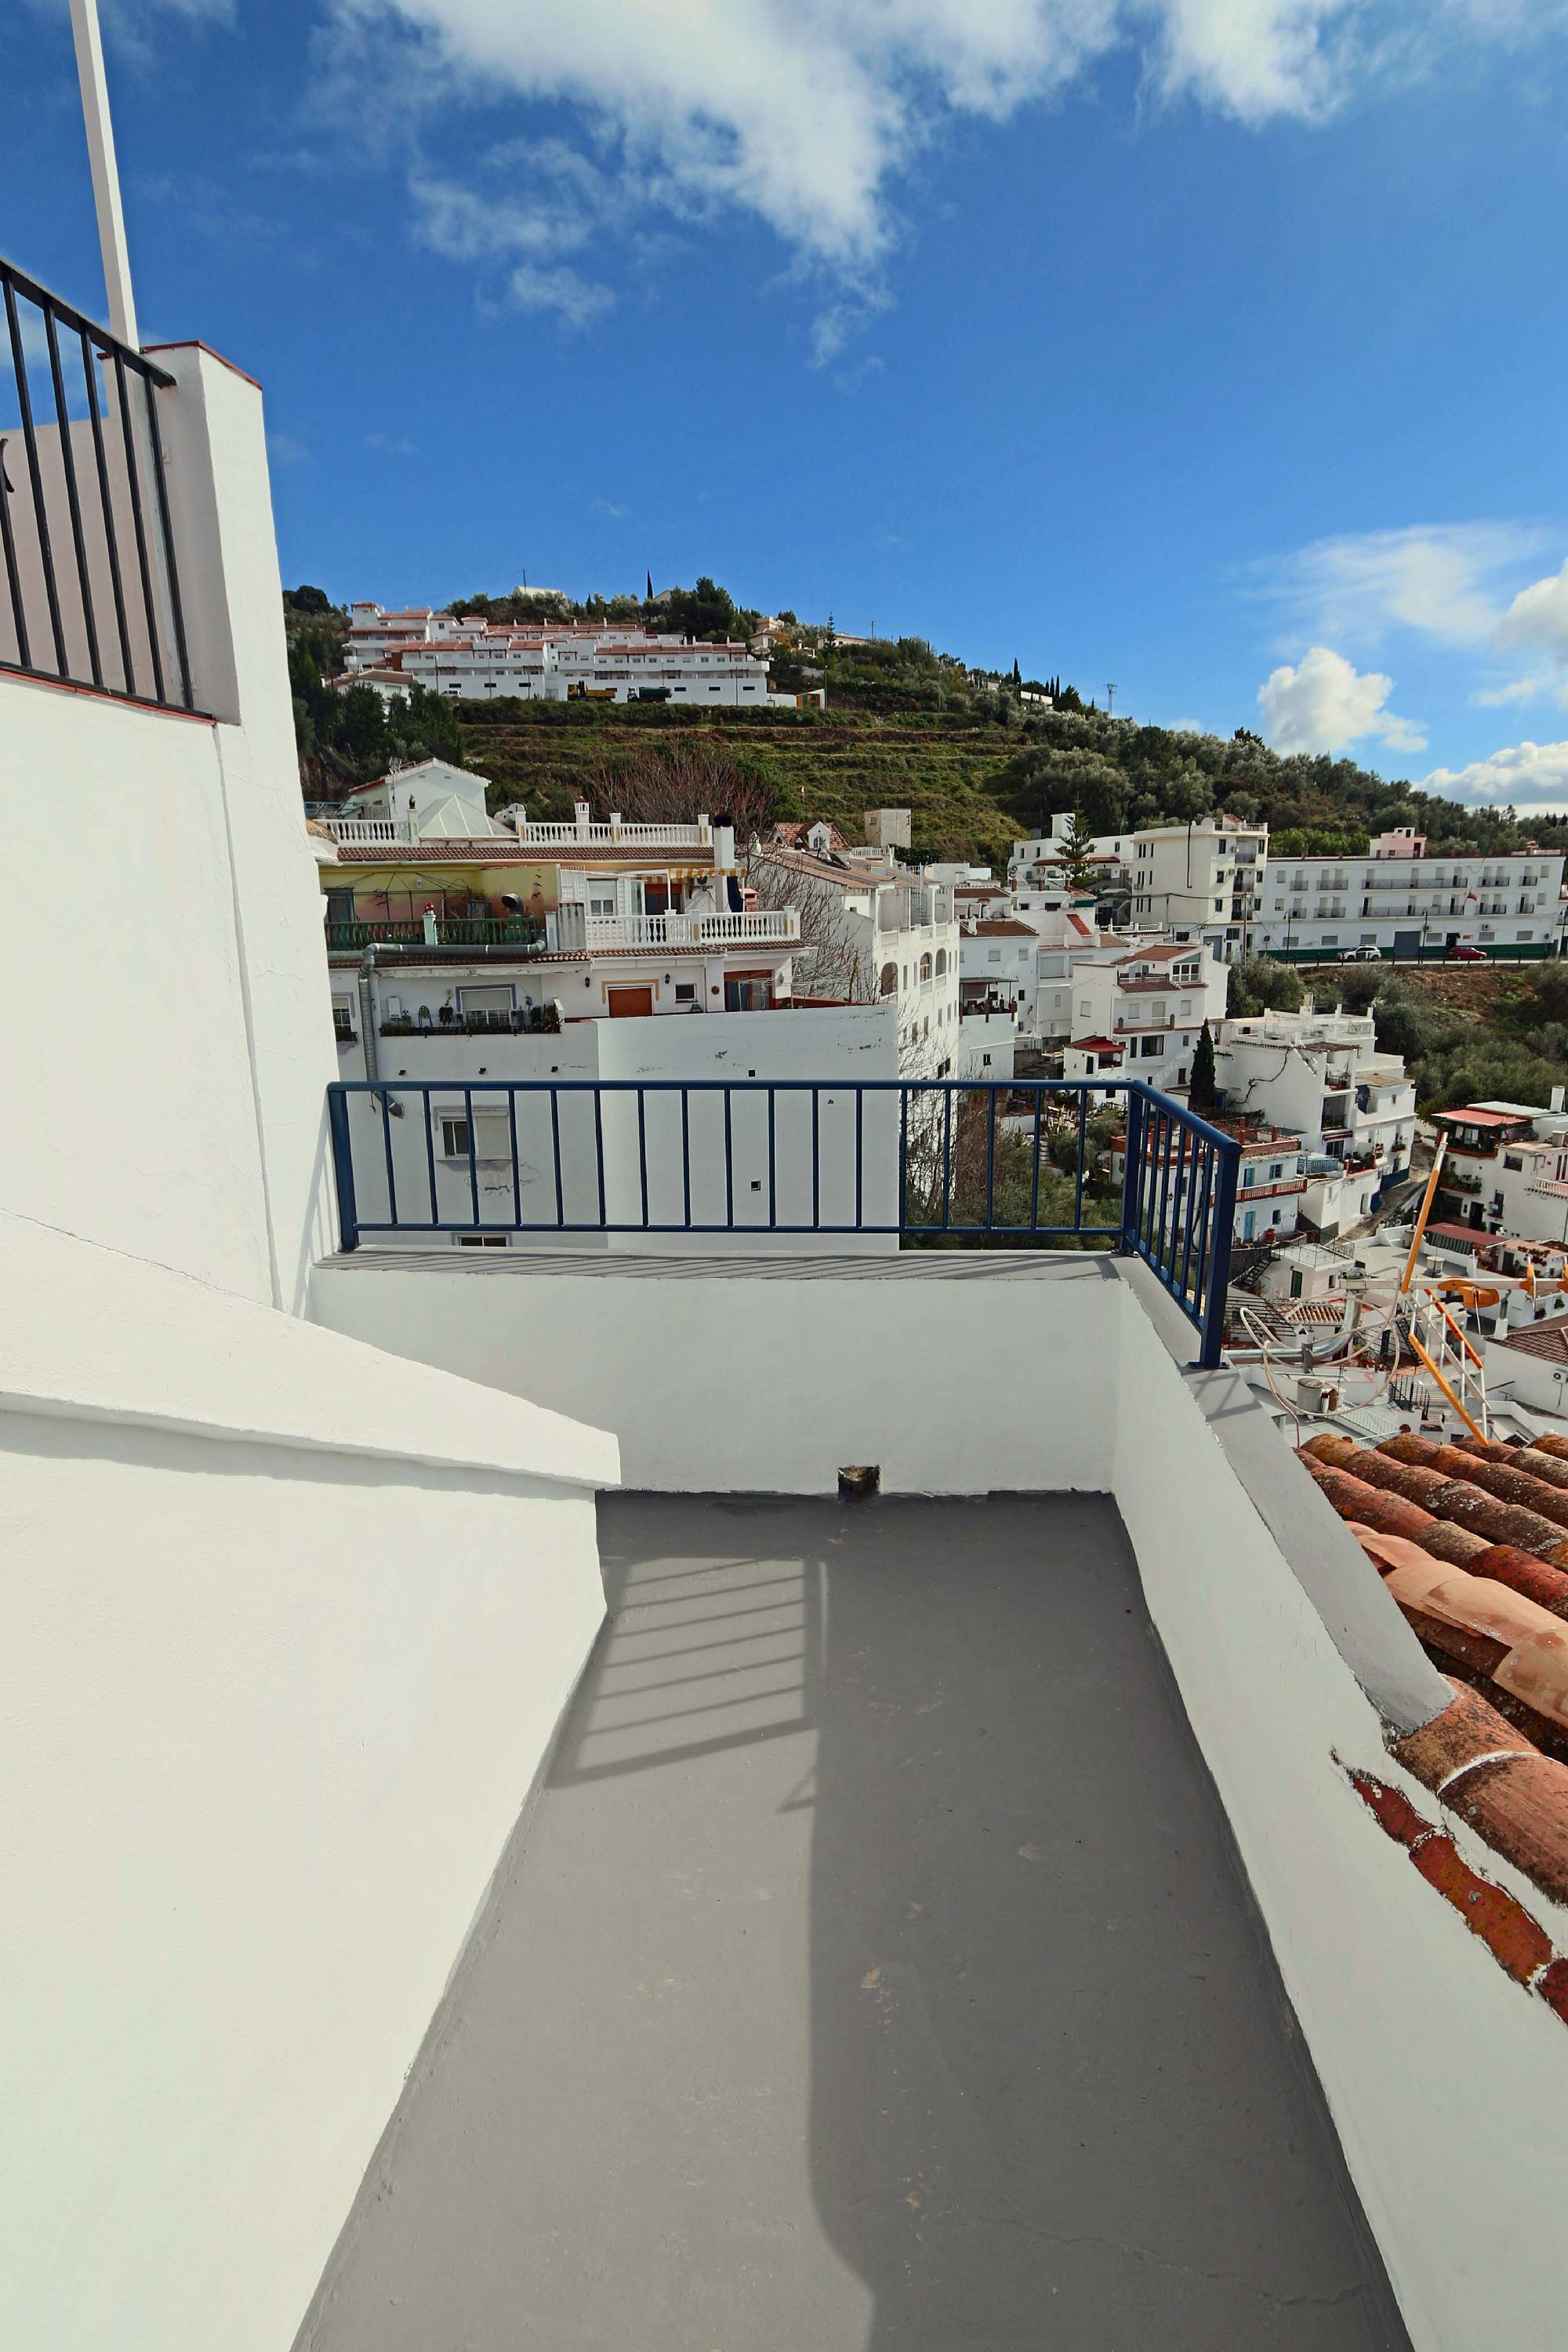 Holiday in Spain Competa, Costa del Sol village town for holiday rental